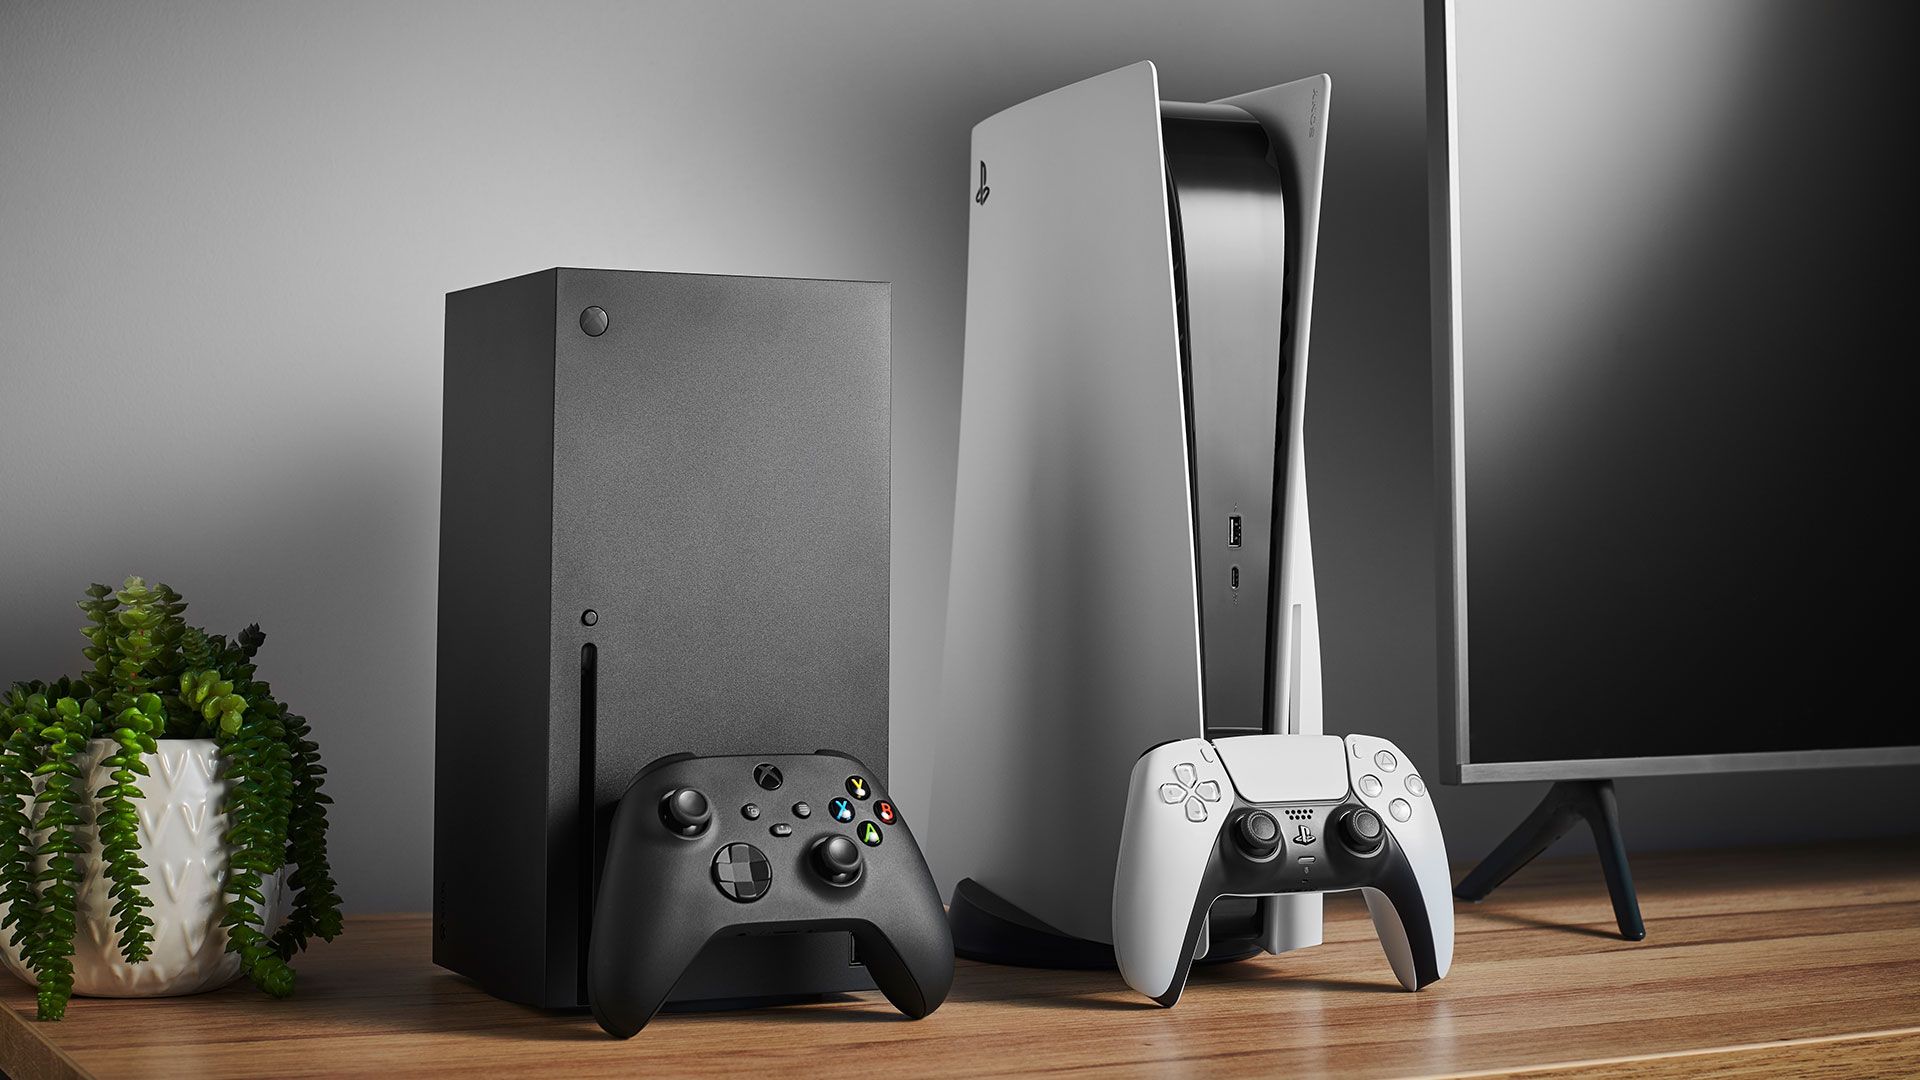 The Ultimate Xbox Series X And PS5 Set Up: The Accessories, Cables, And Gadgets You Need To Get The Most Out Of Next Gen